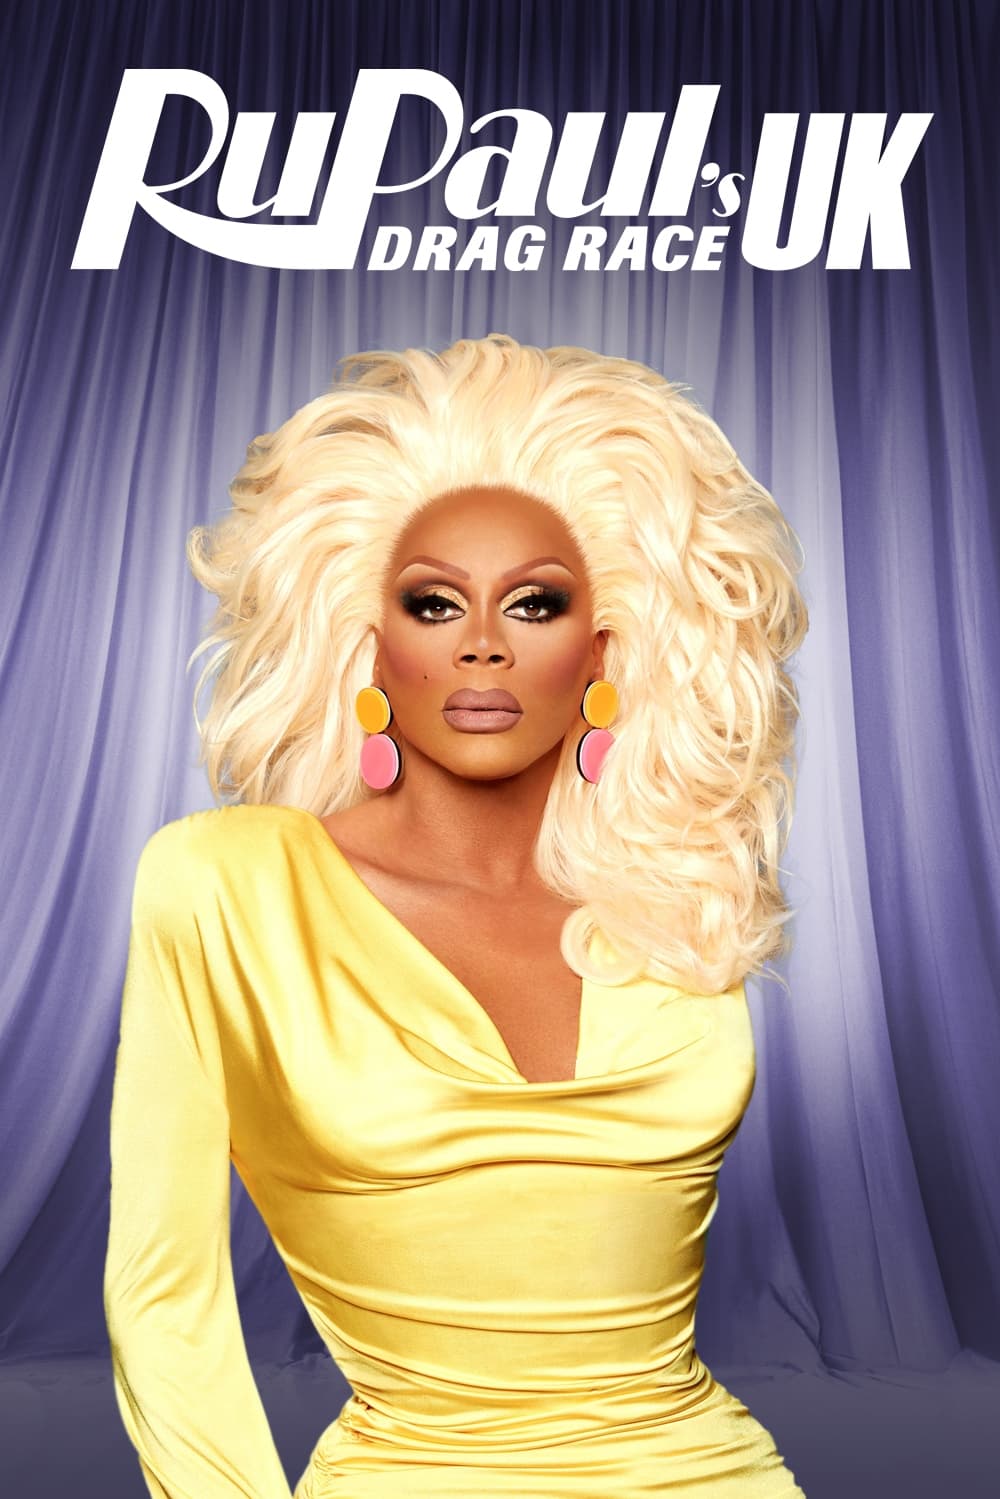 RuPaul's Drag Race UK TV Shows About Gay Interest